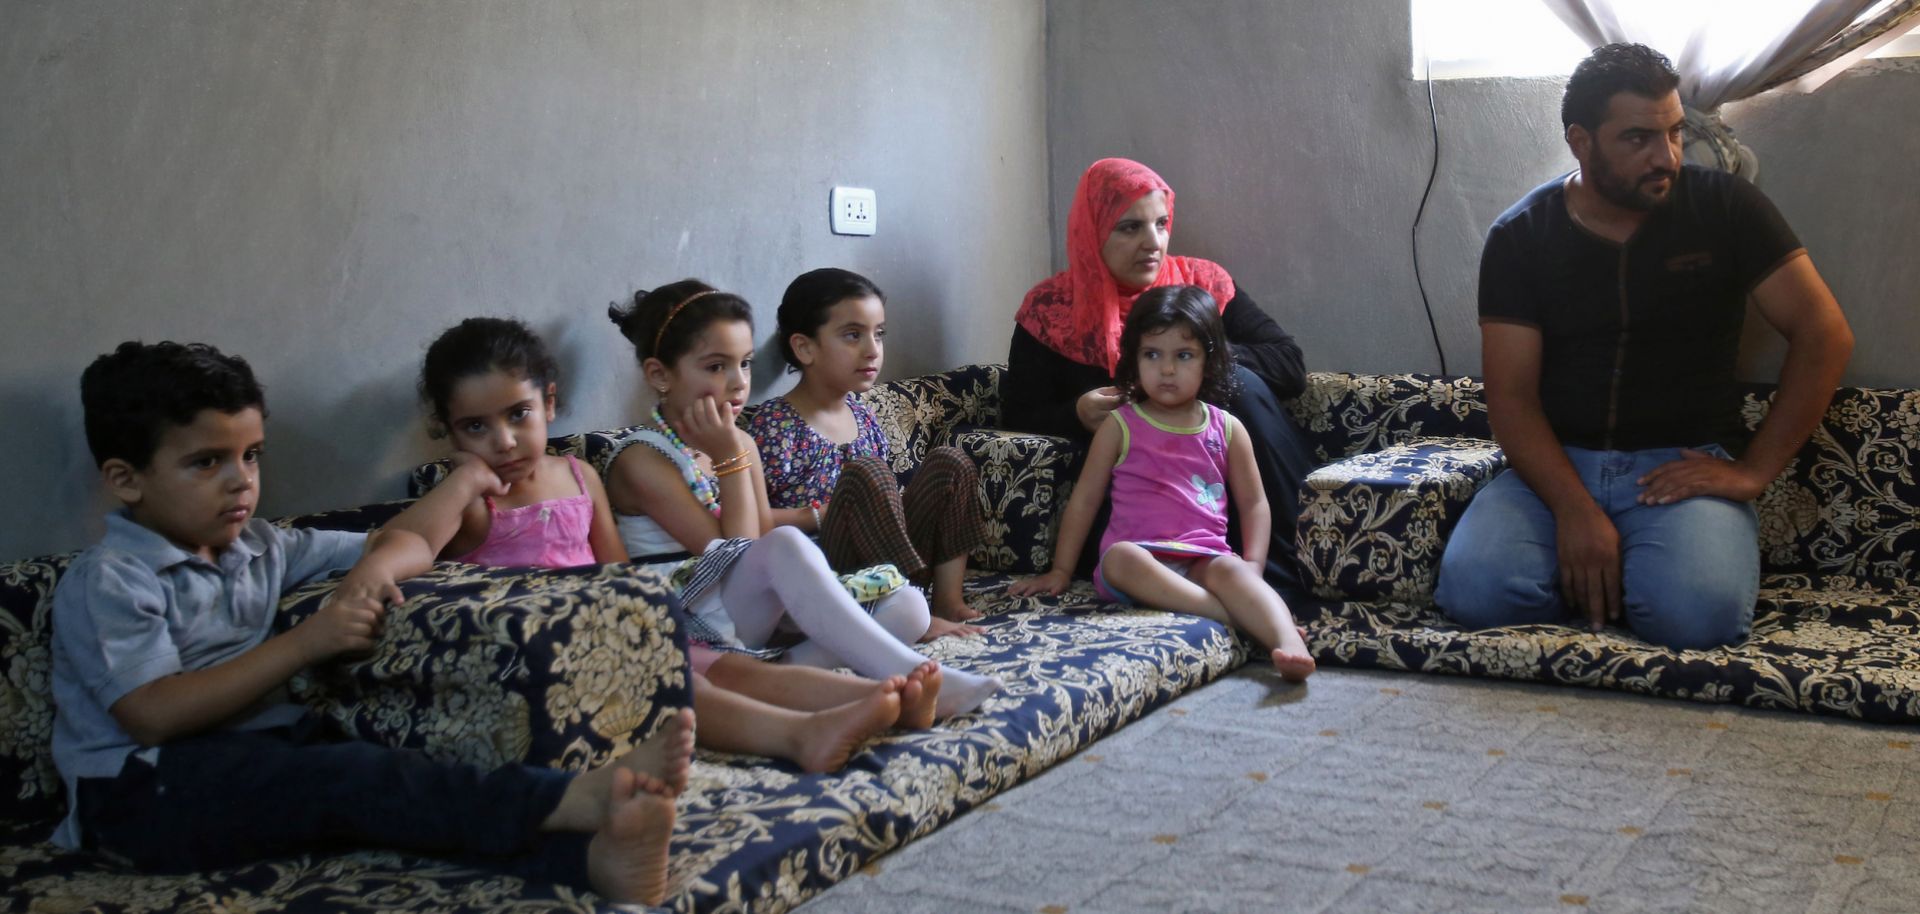 A Syrian refugee family sit in a home in Jordan where a Norwegian nongovernmental organization has arranged for them to stay.